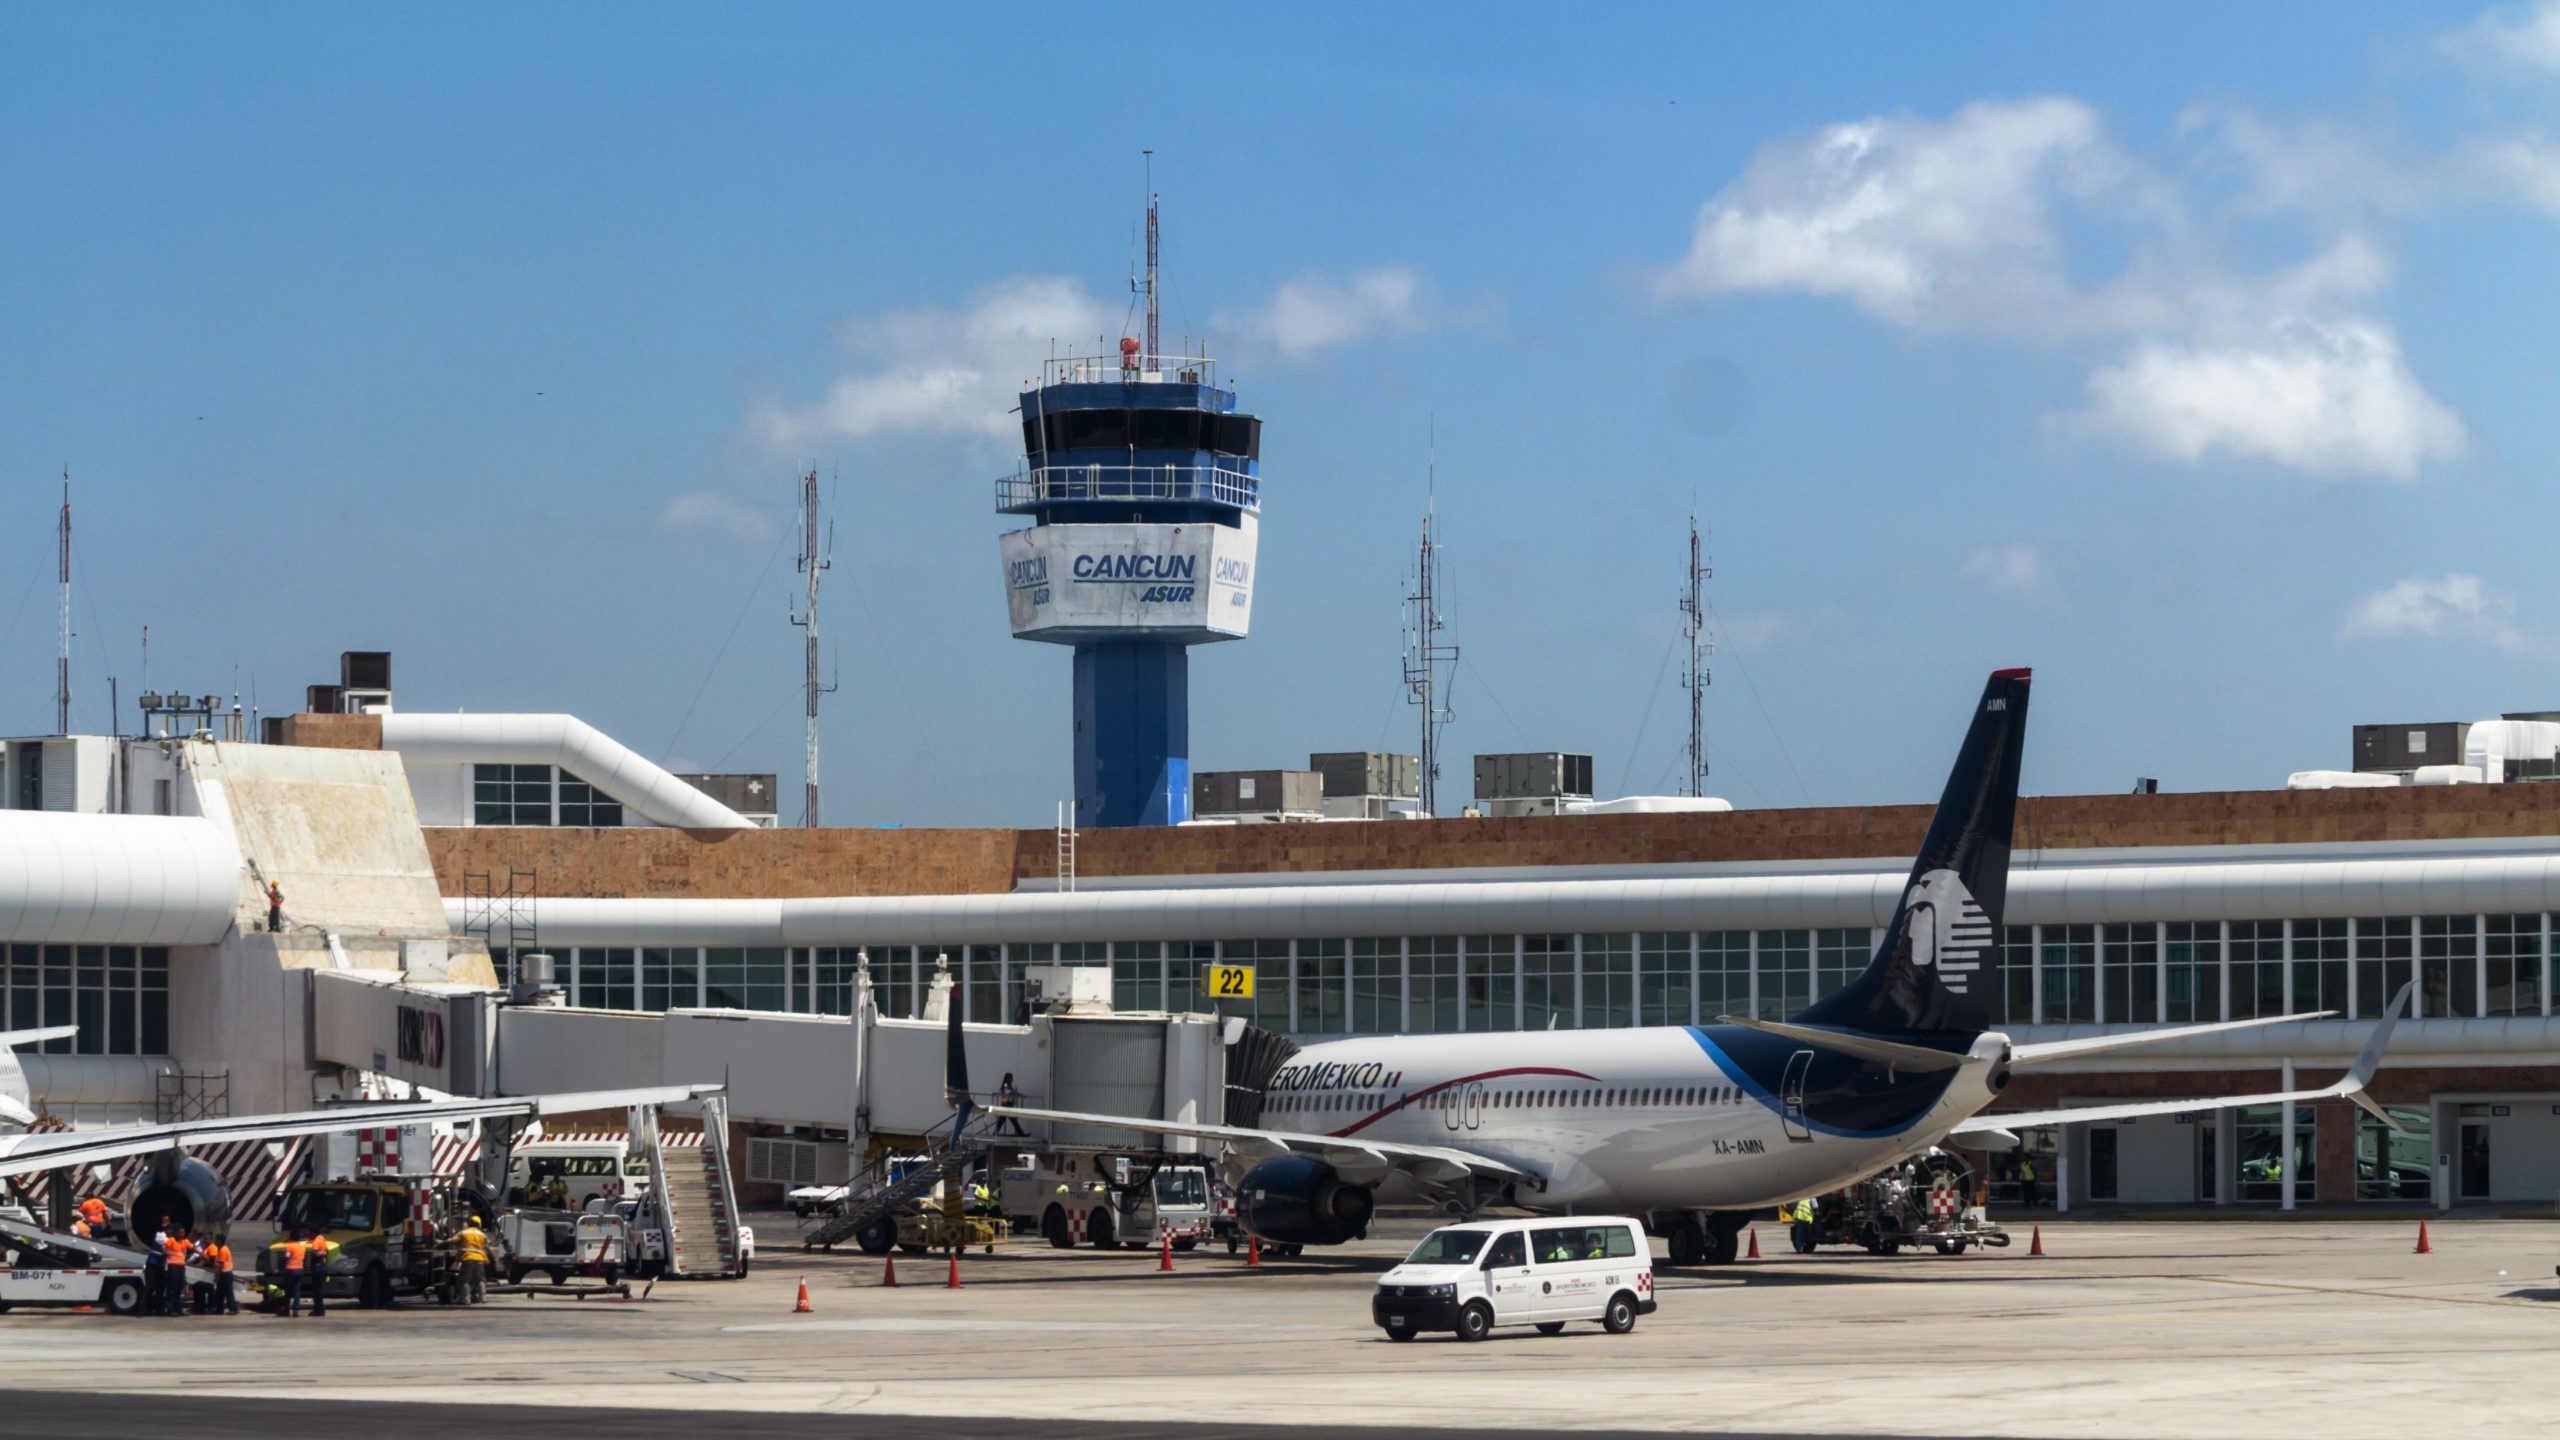 Cancun Airport Reports Increased Passenger Traffic The Cancun Herald